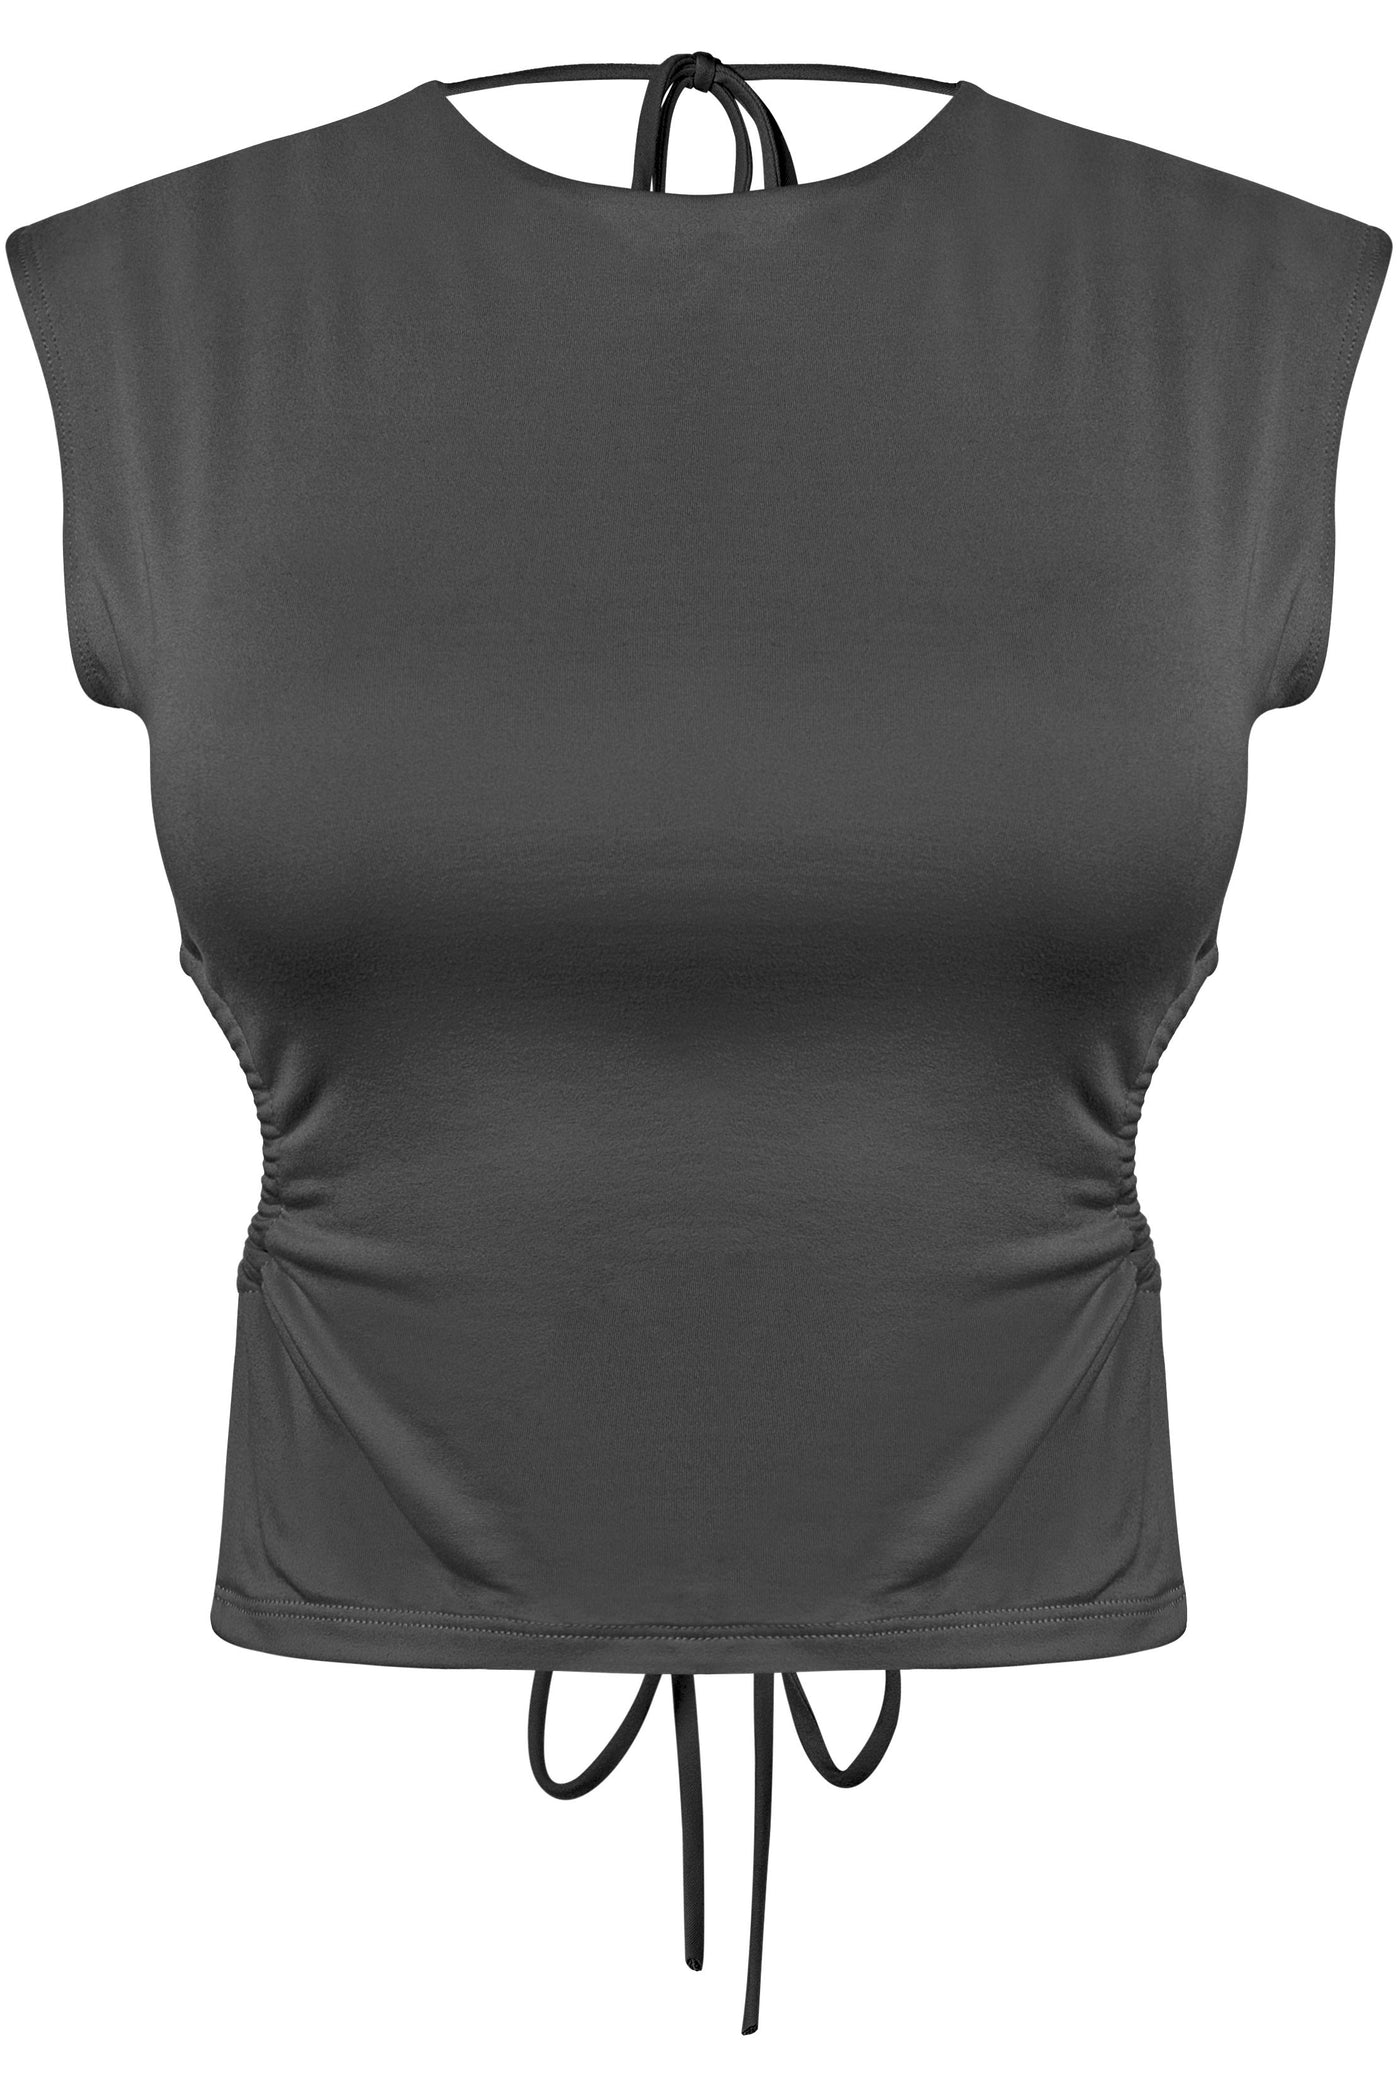 HALO OPEN BACK TOP